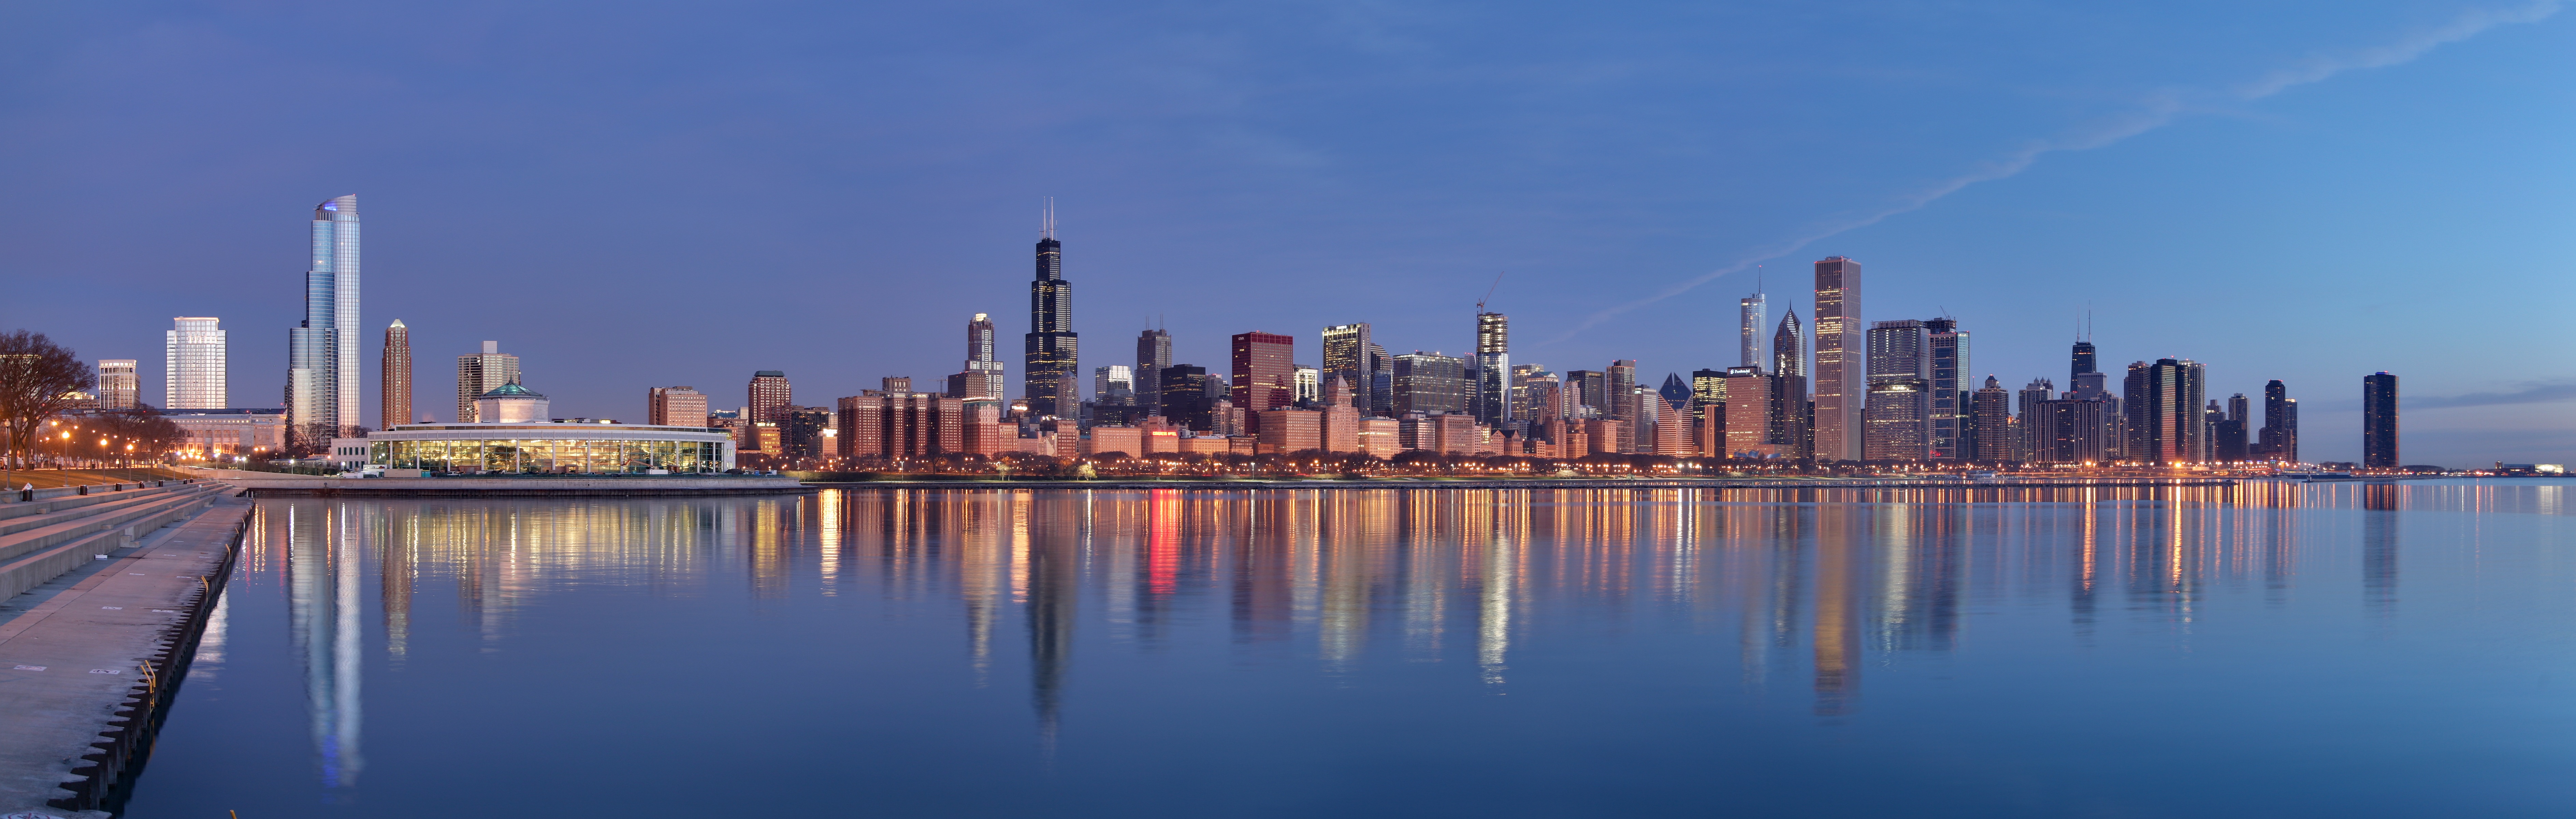 chicago-free-background-images